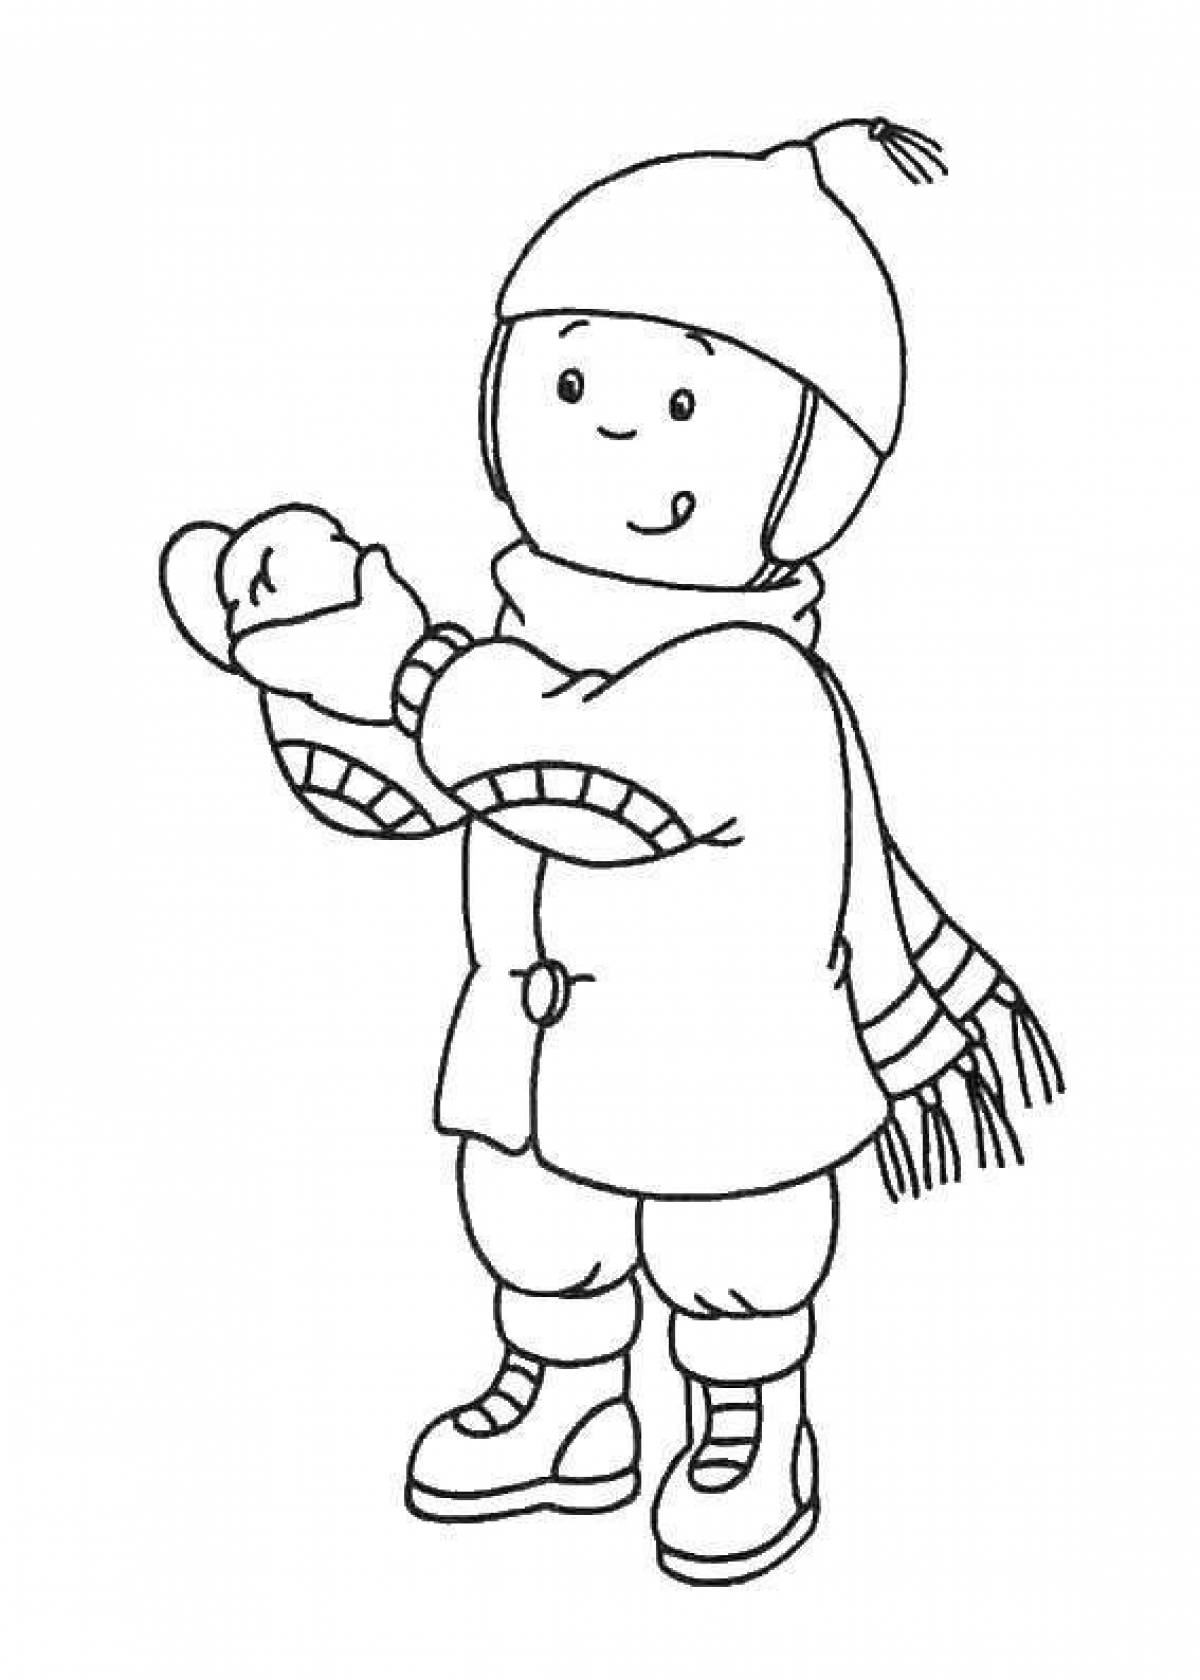 Animated coloring book boy in winter clothes